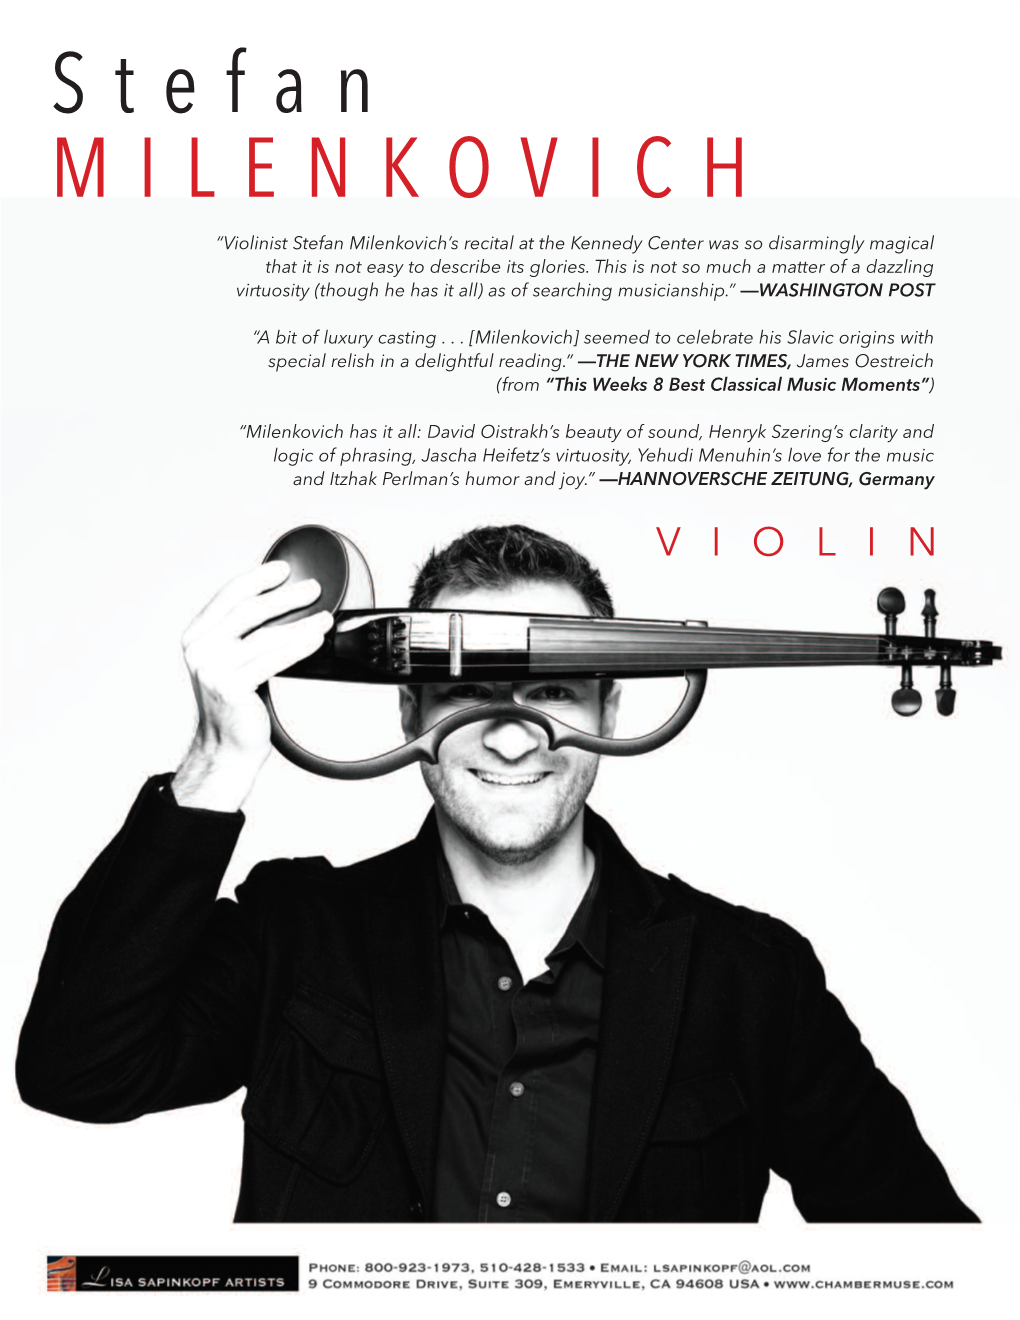 Stefan MILENKOVICH “Violinist Stefan Milenkovich’S Recital at the Kennedy Center Was So Disarmingly Magical That It Is Not Easy to Describe Its Glories